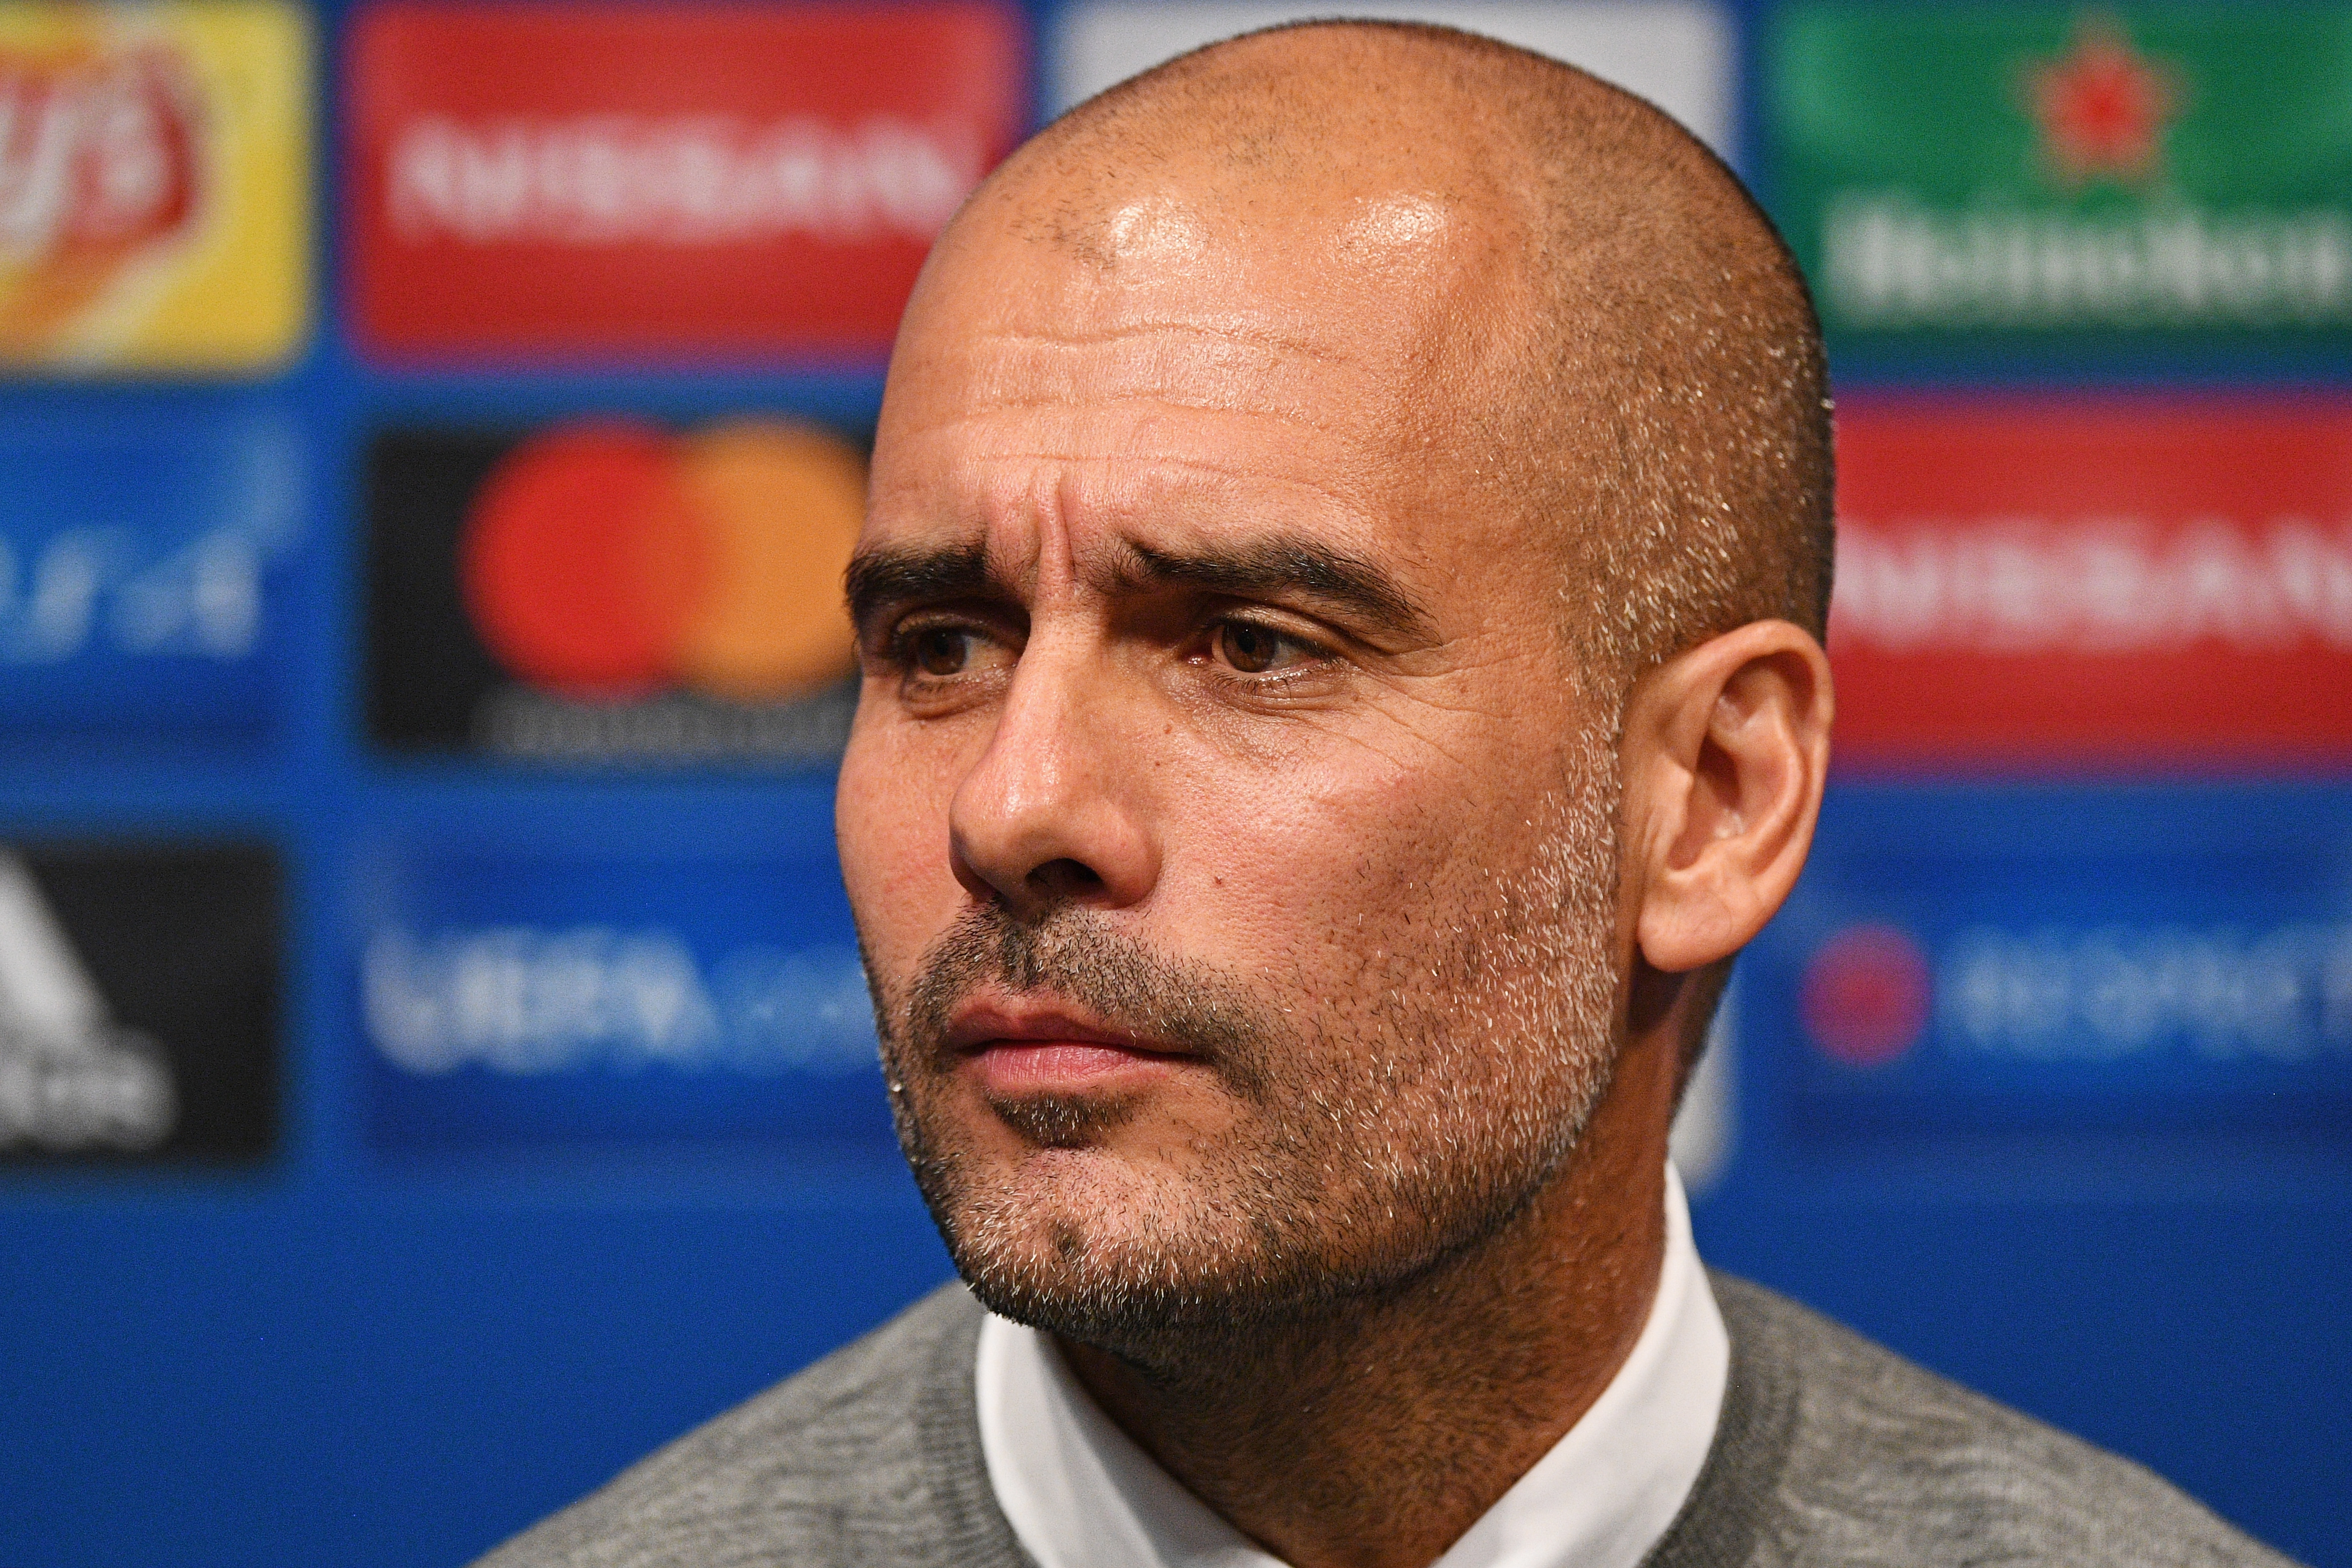 Six games without a win is a concern, admits Guardiola